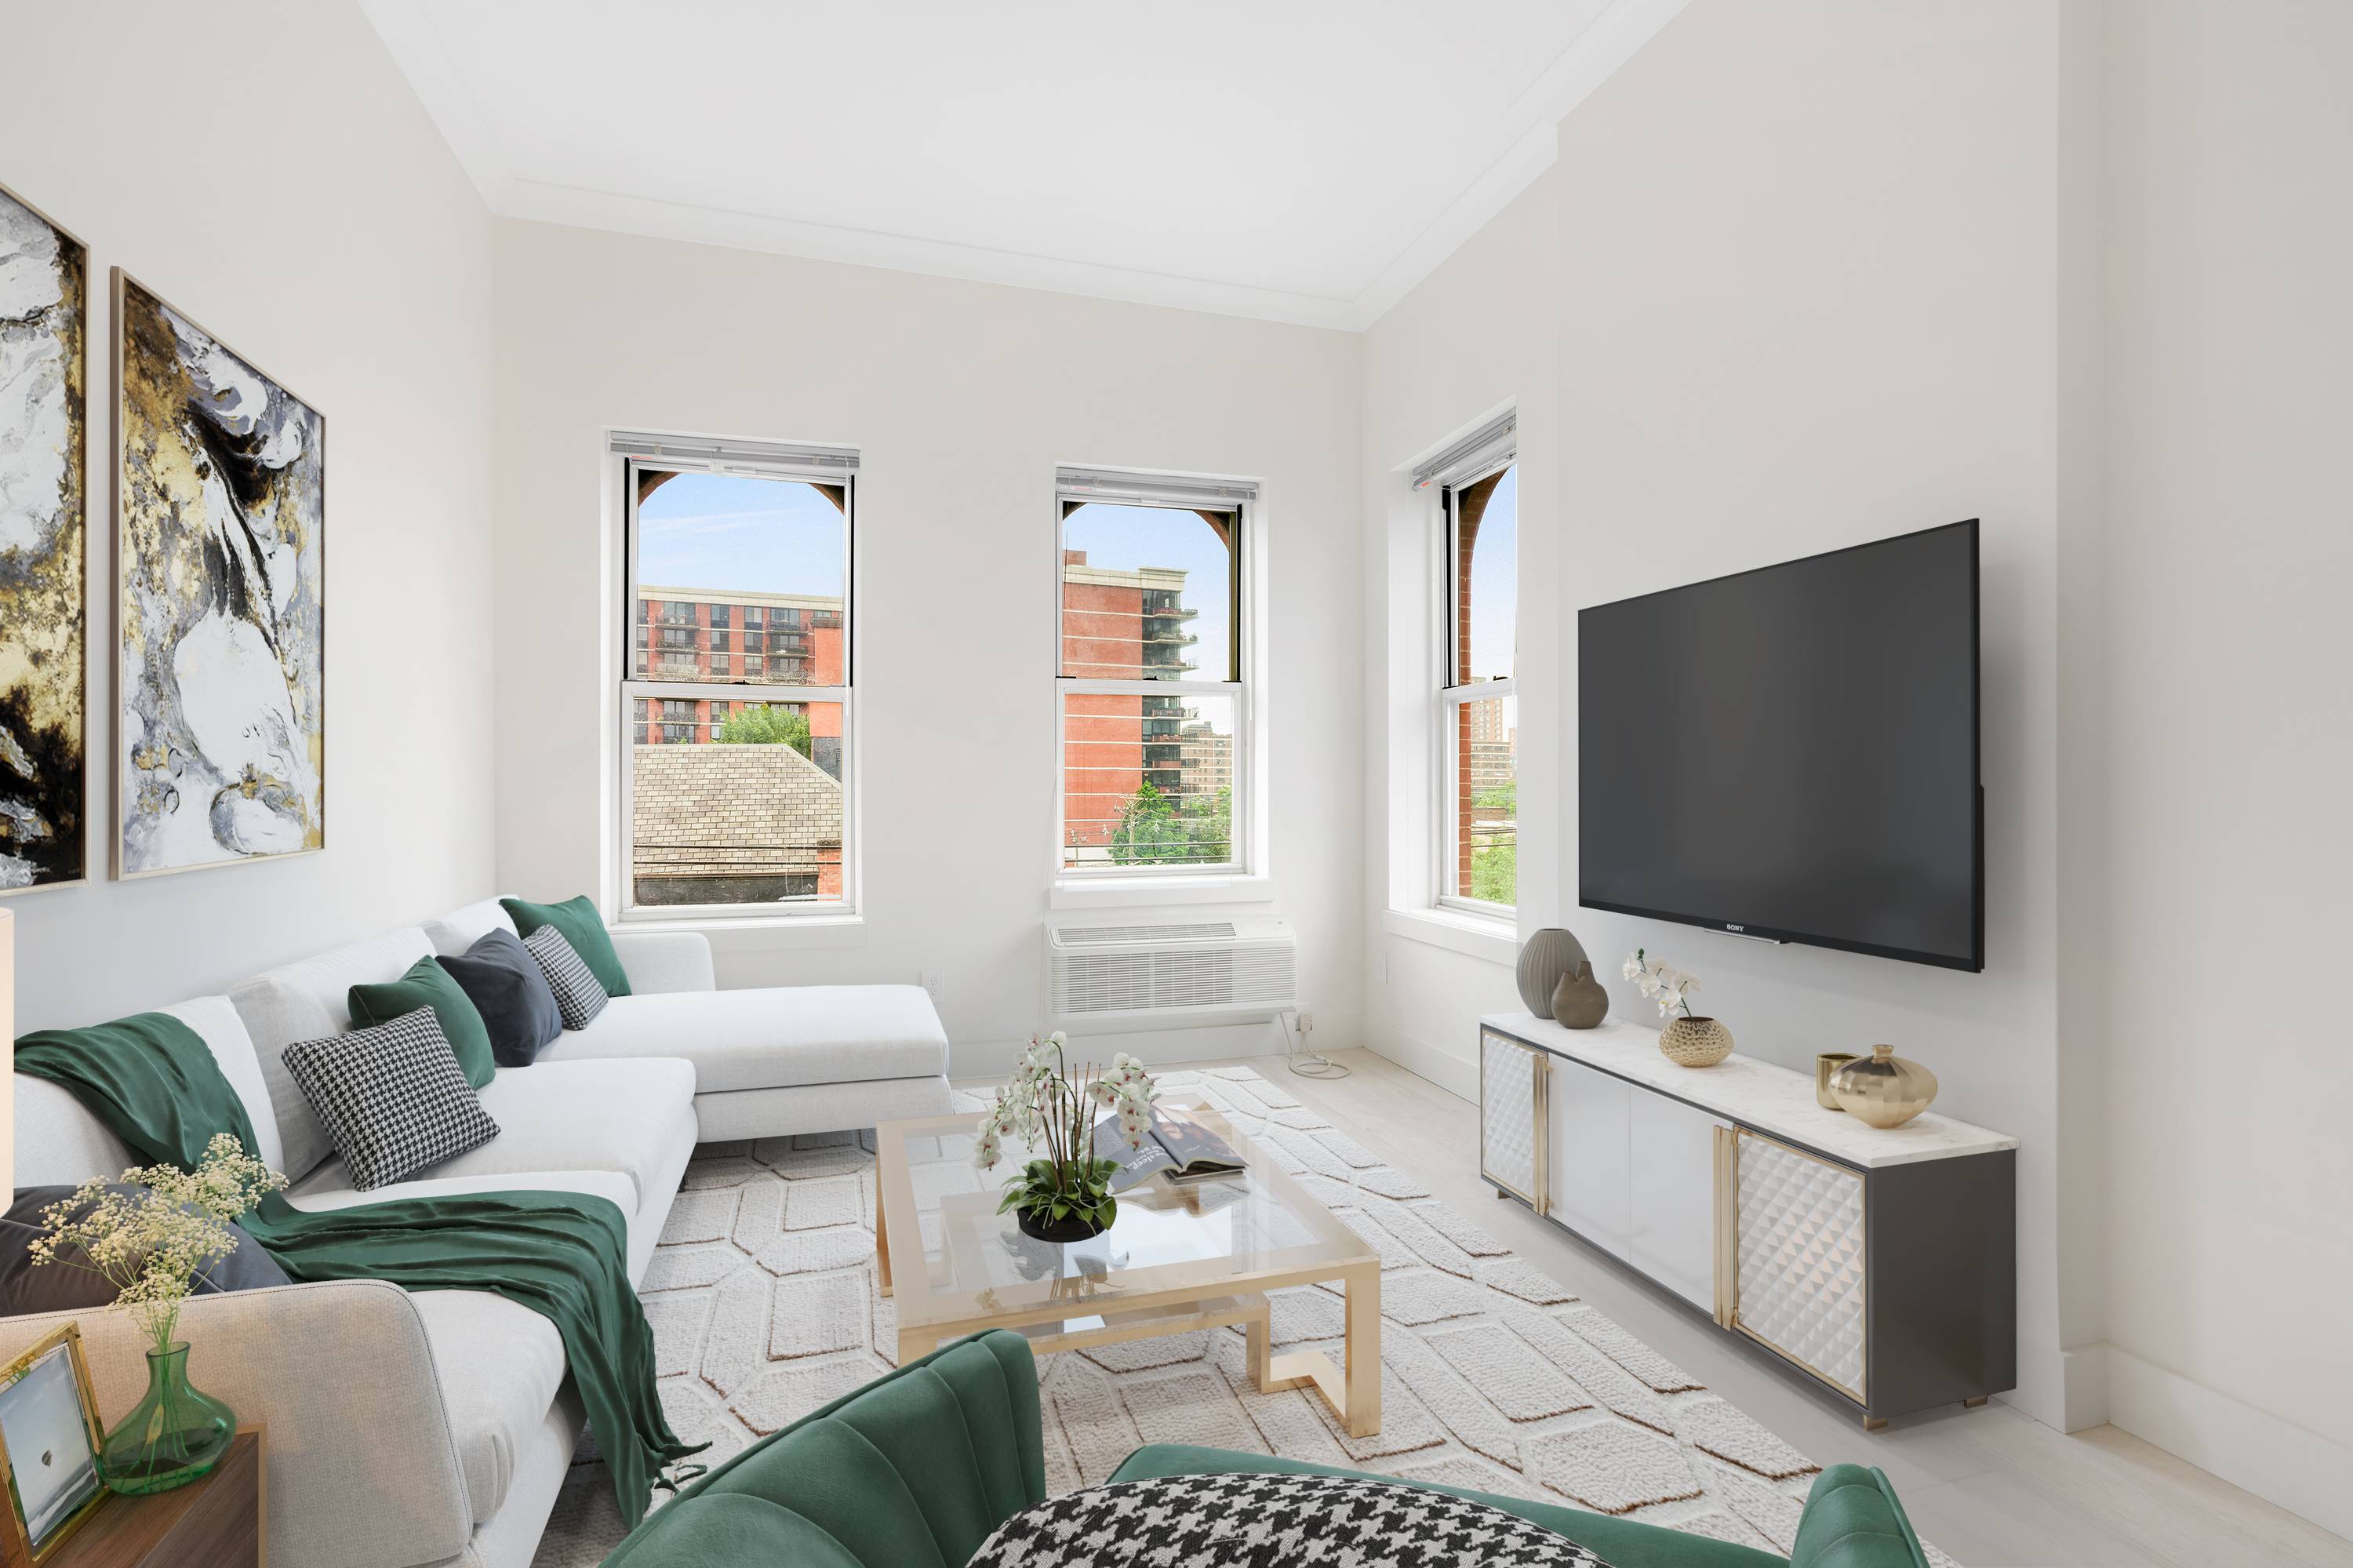 Brand New No Fee Luxury Apartments in Hoboken, NJ! 1 & 3 Bedrooms Now Available!